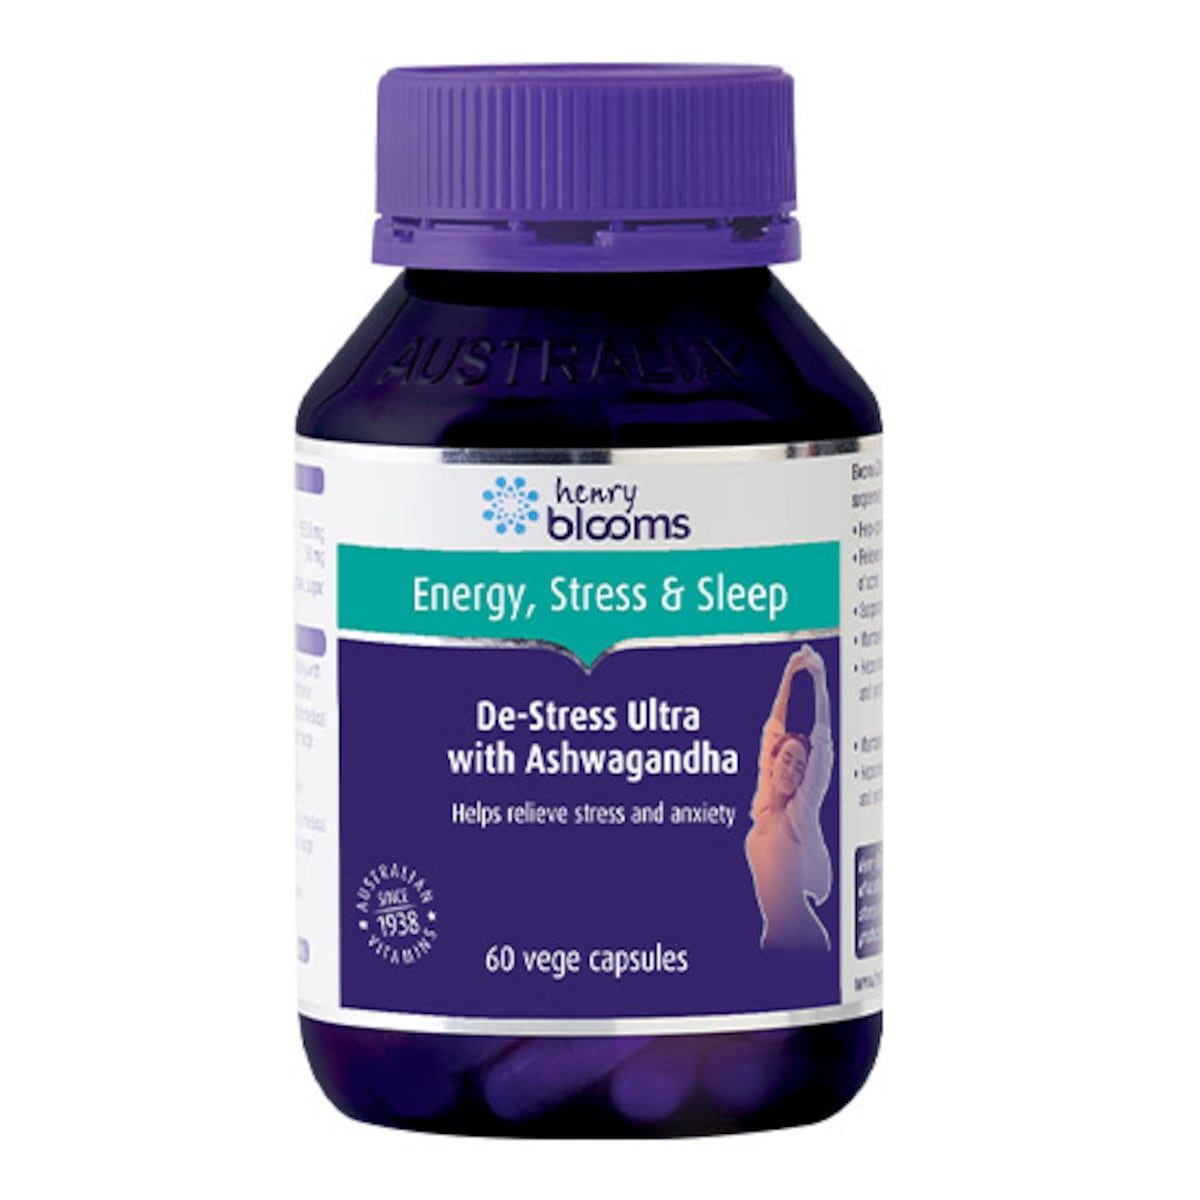 Henry Blooms De-Stress Ultra with Ashwagandha 60 capsules